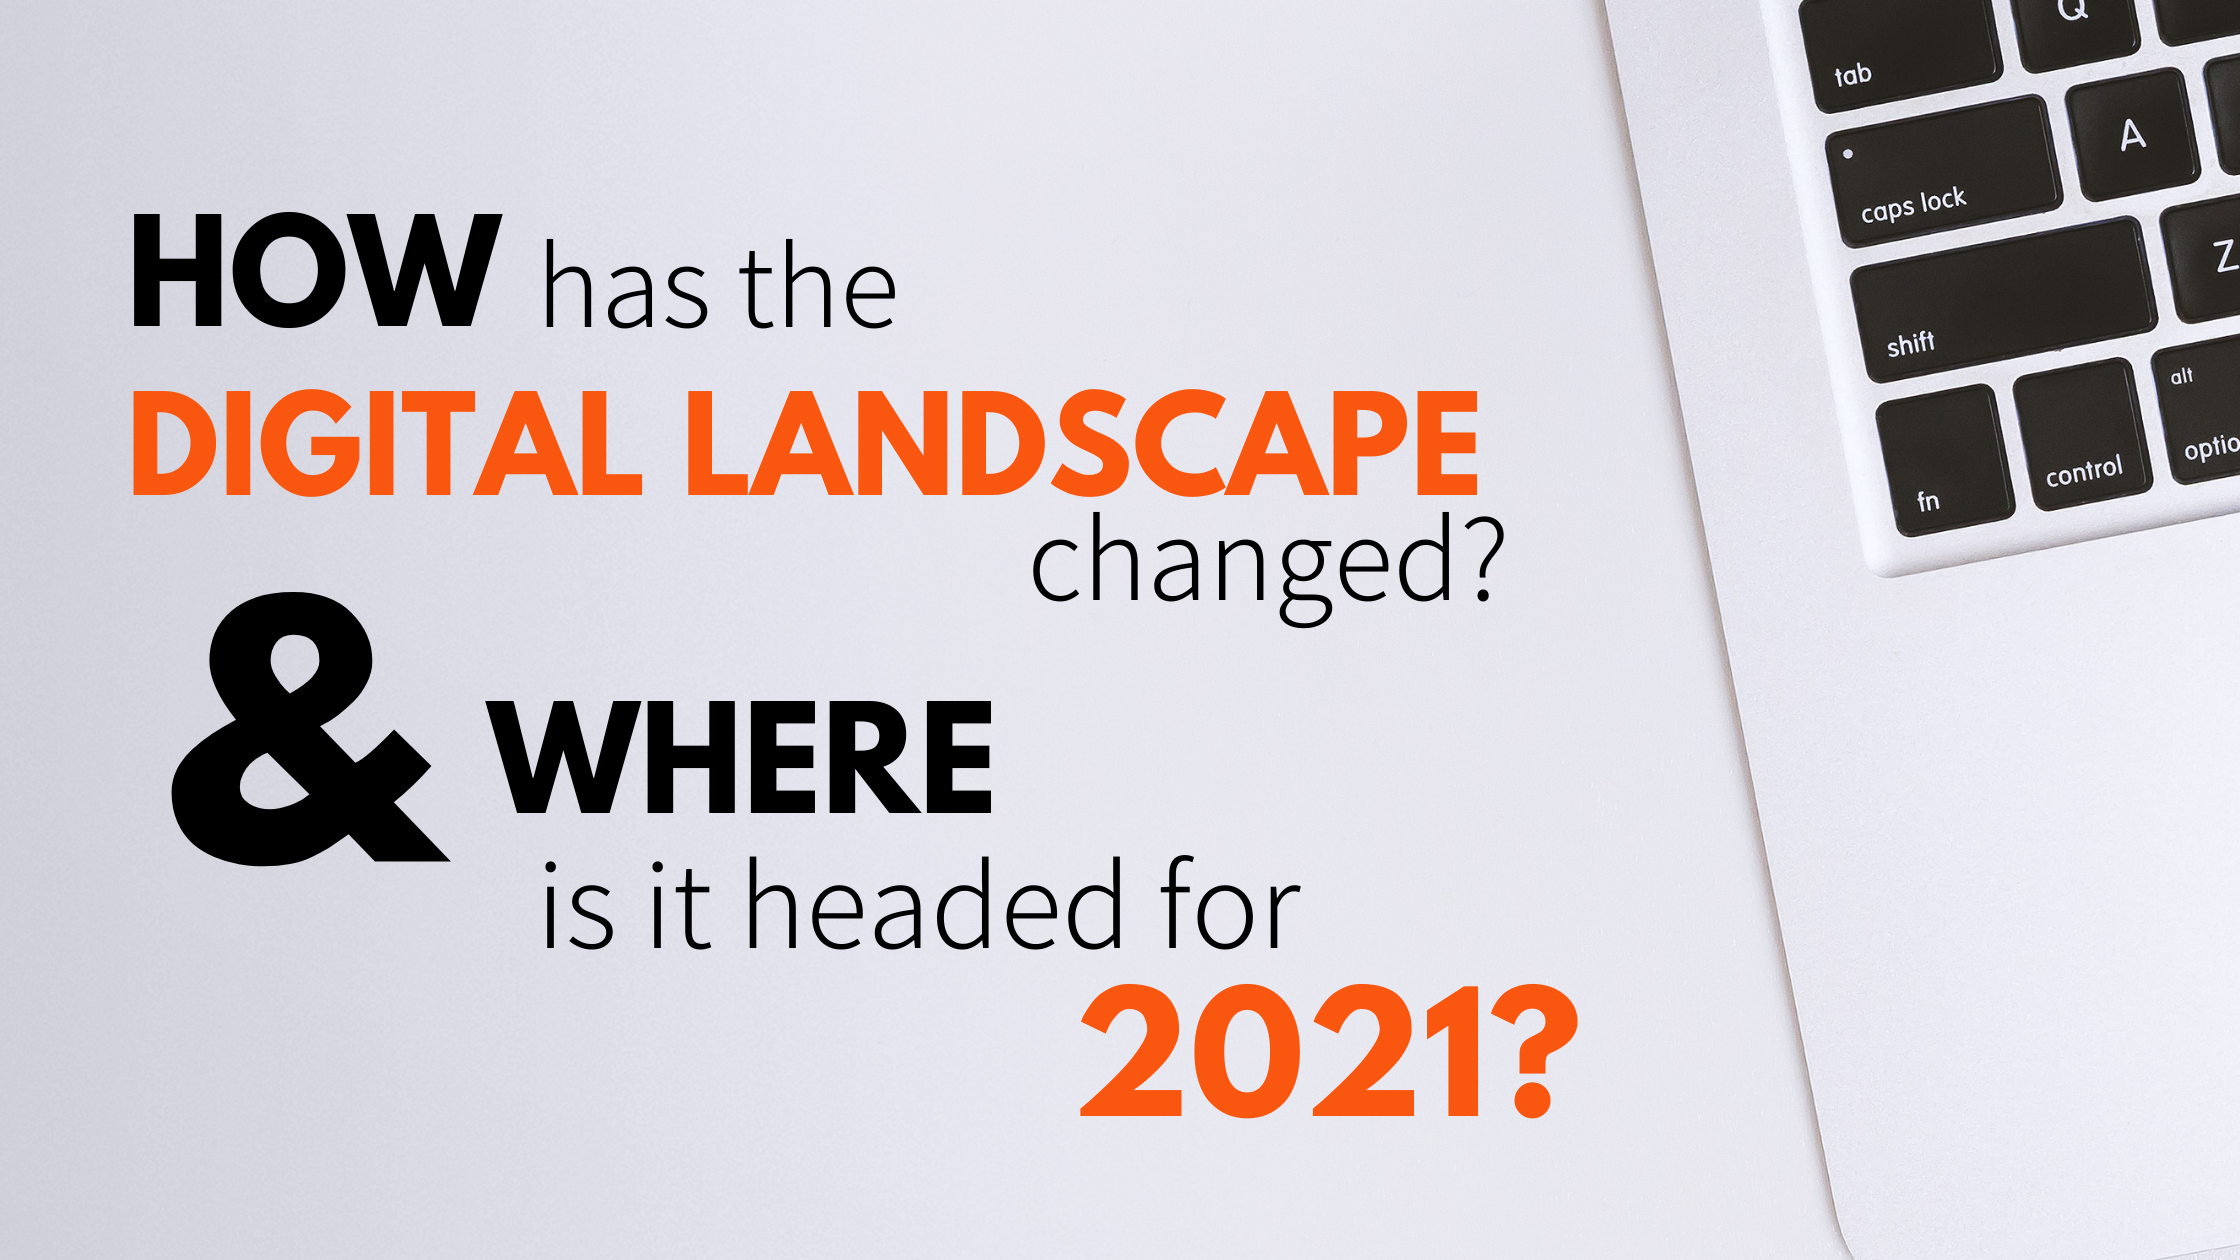 How has the digital landscape changed and where is it headed for 2021?